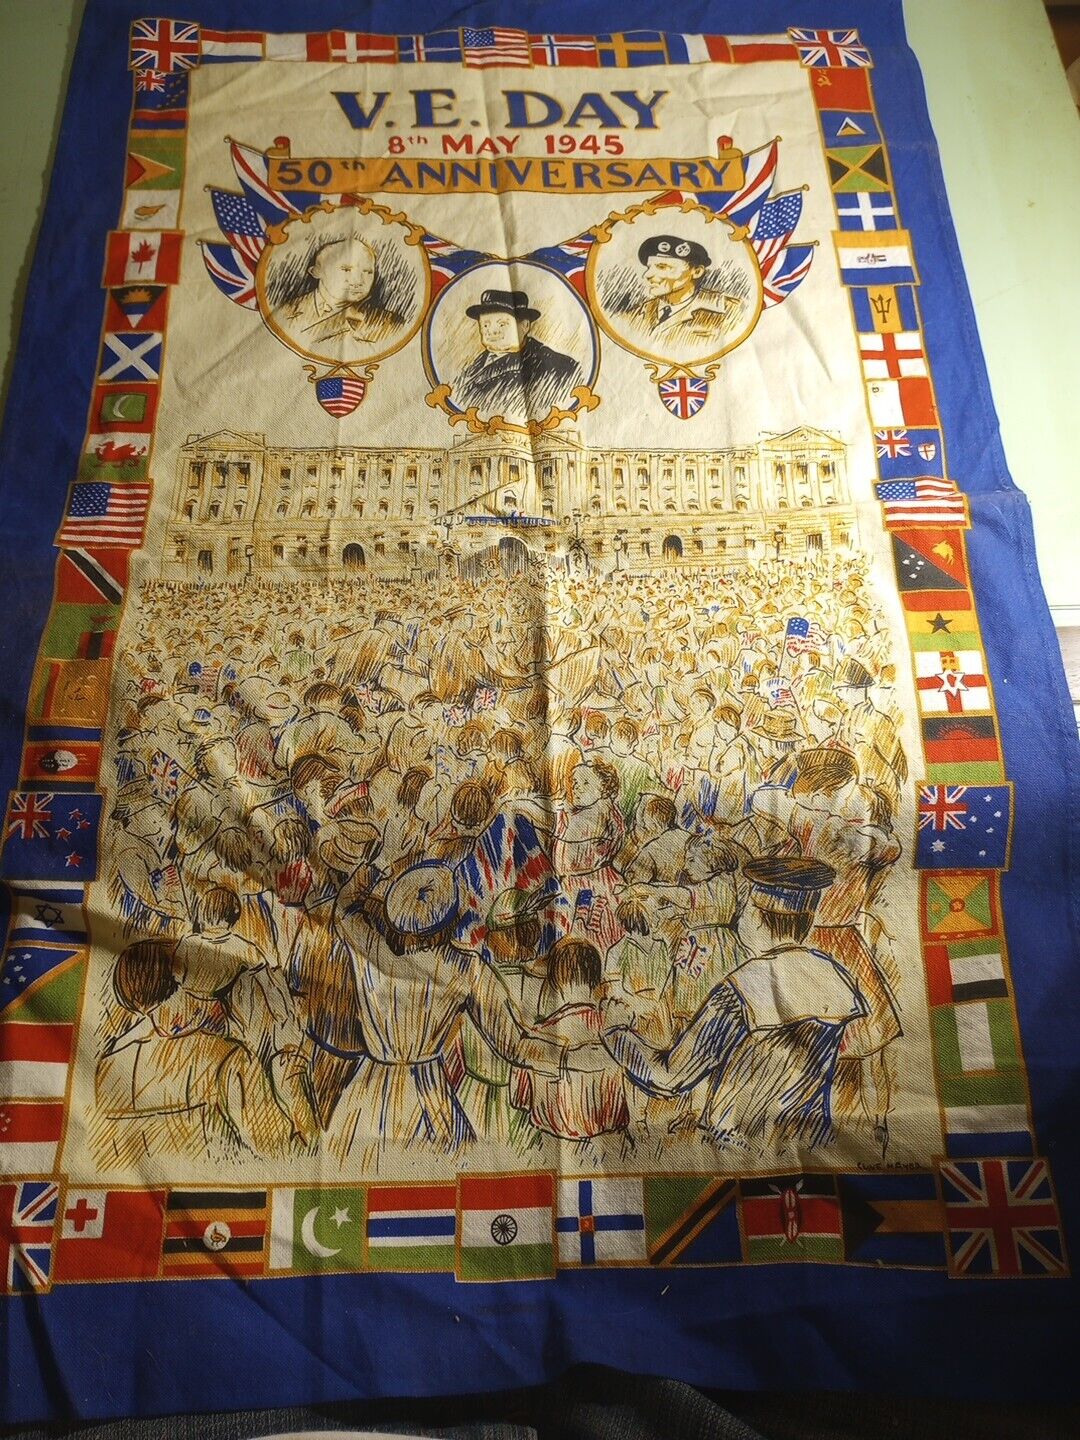 Vintage VE Day 50th Anniversary tea towel by Clive Mayor. 100% cotton